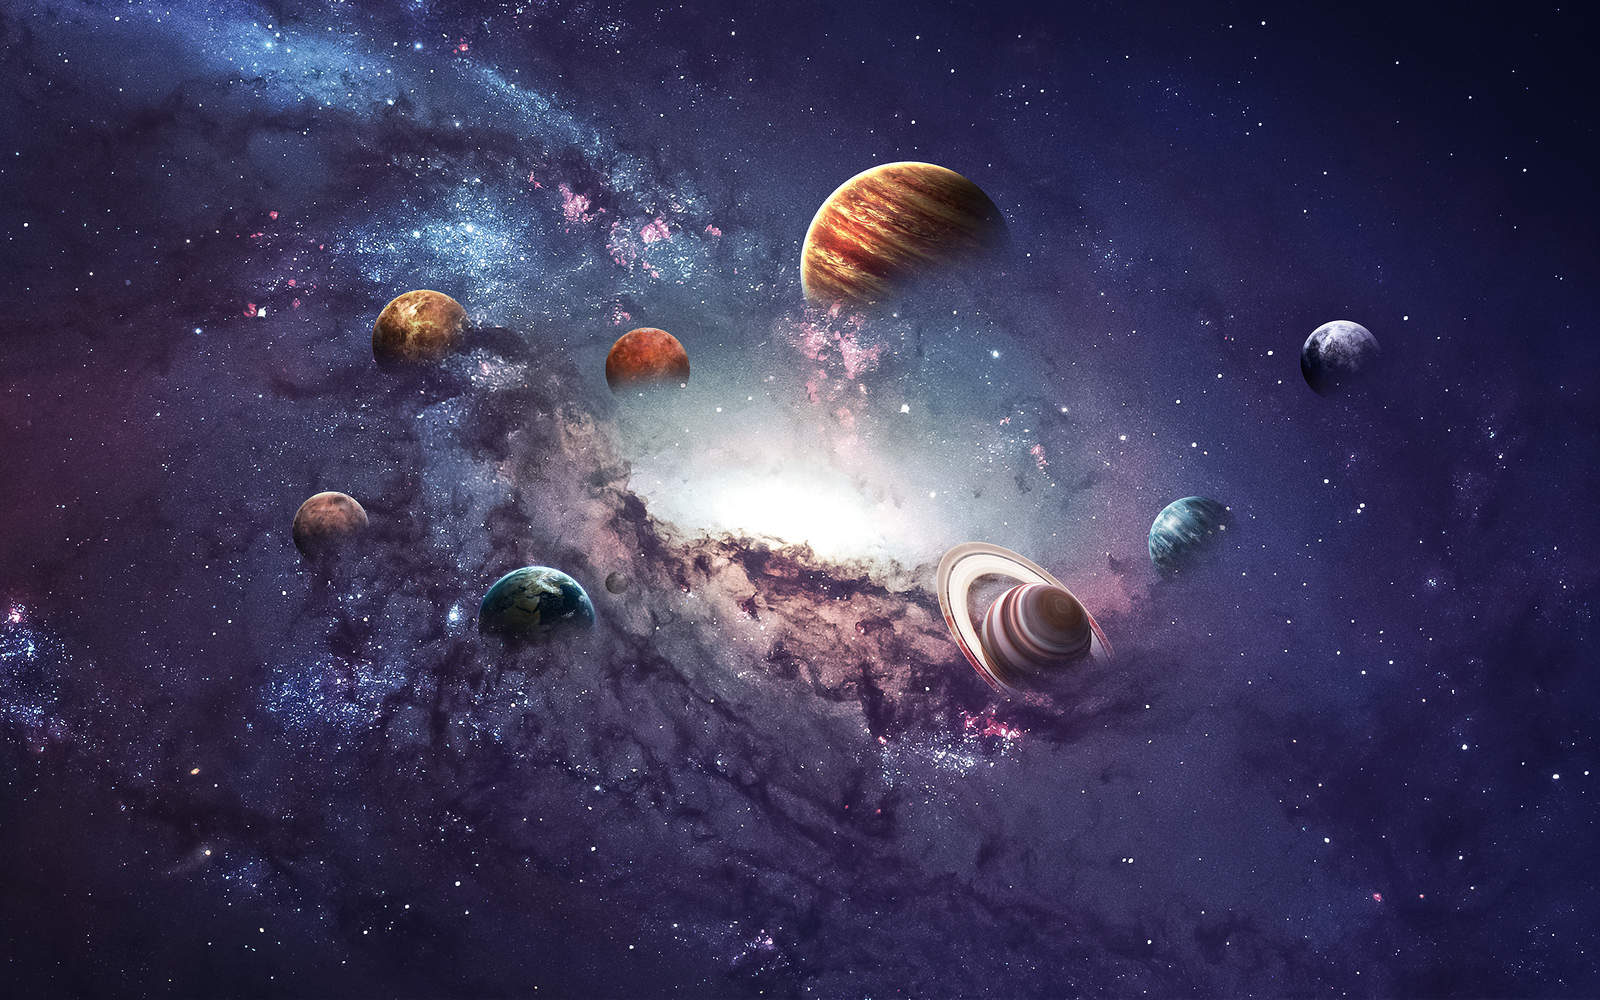 If You Get 11/15 on This Random Knowledge Quiz, You Have Infinite Wisdom planets